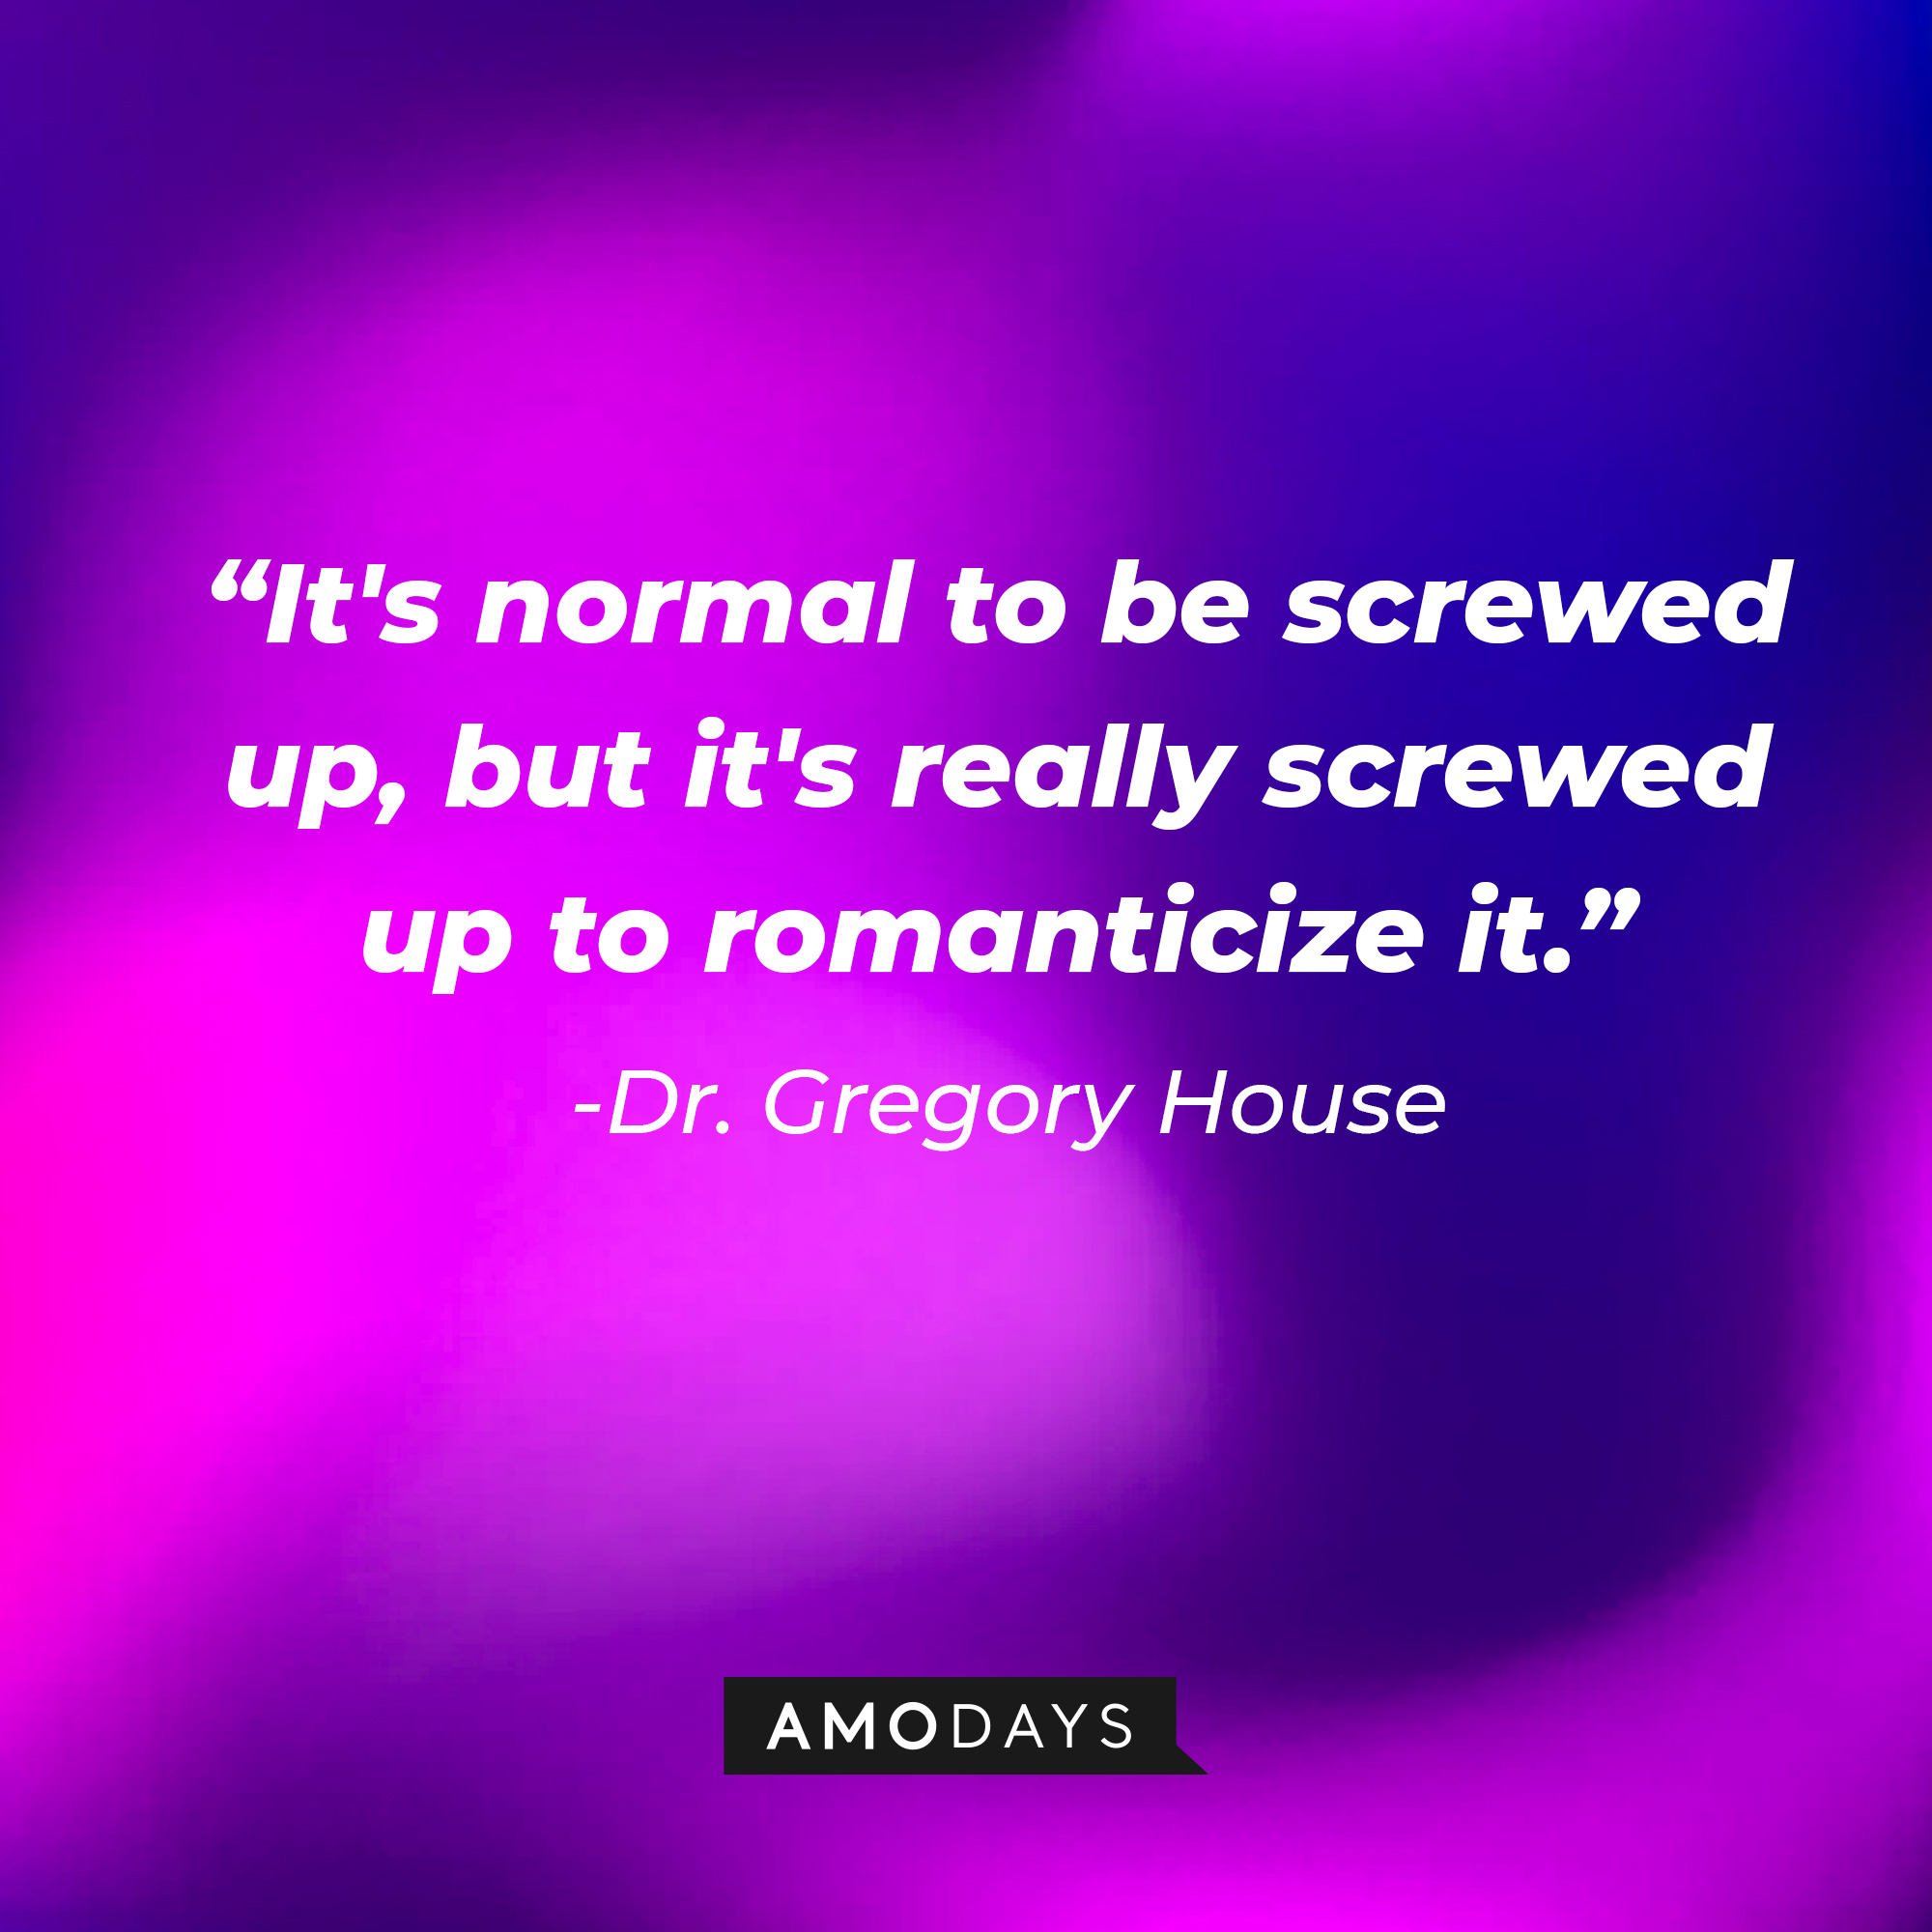 Dr. Gregory House’s quote: “It's normal to be screwed up, but it's really screwed up to romanticize it.” | Source: AmoDays